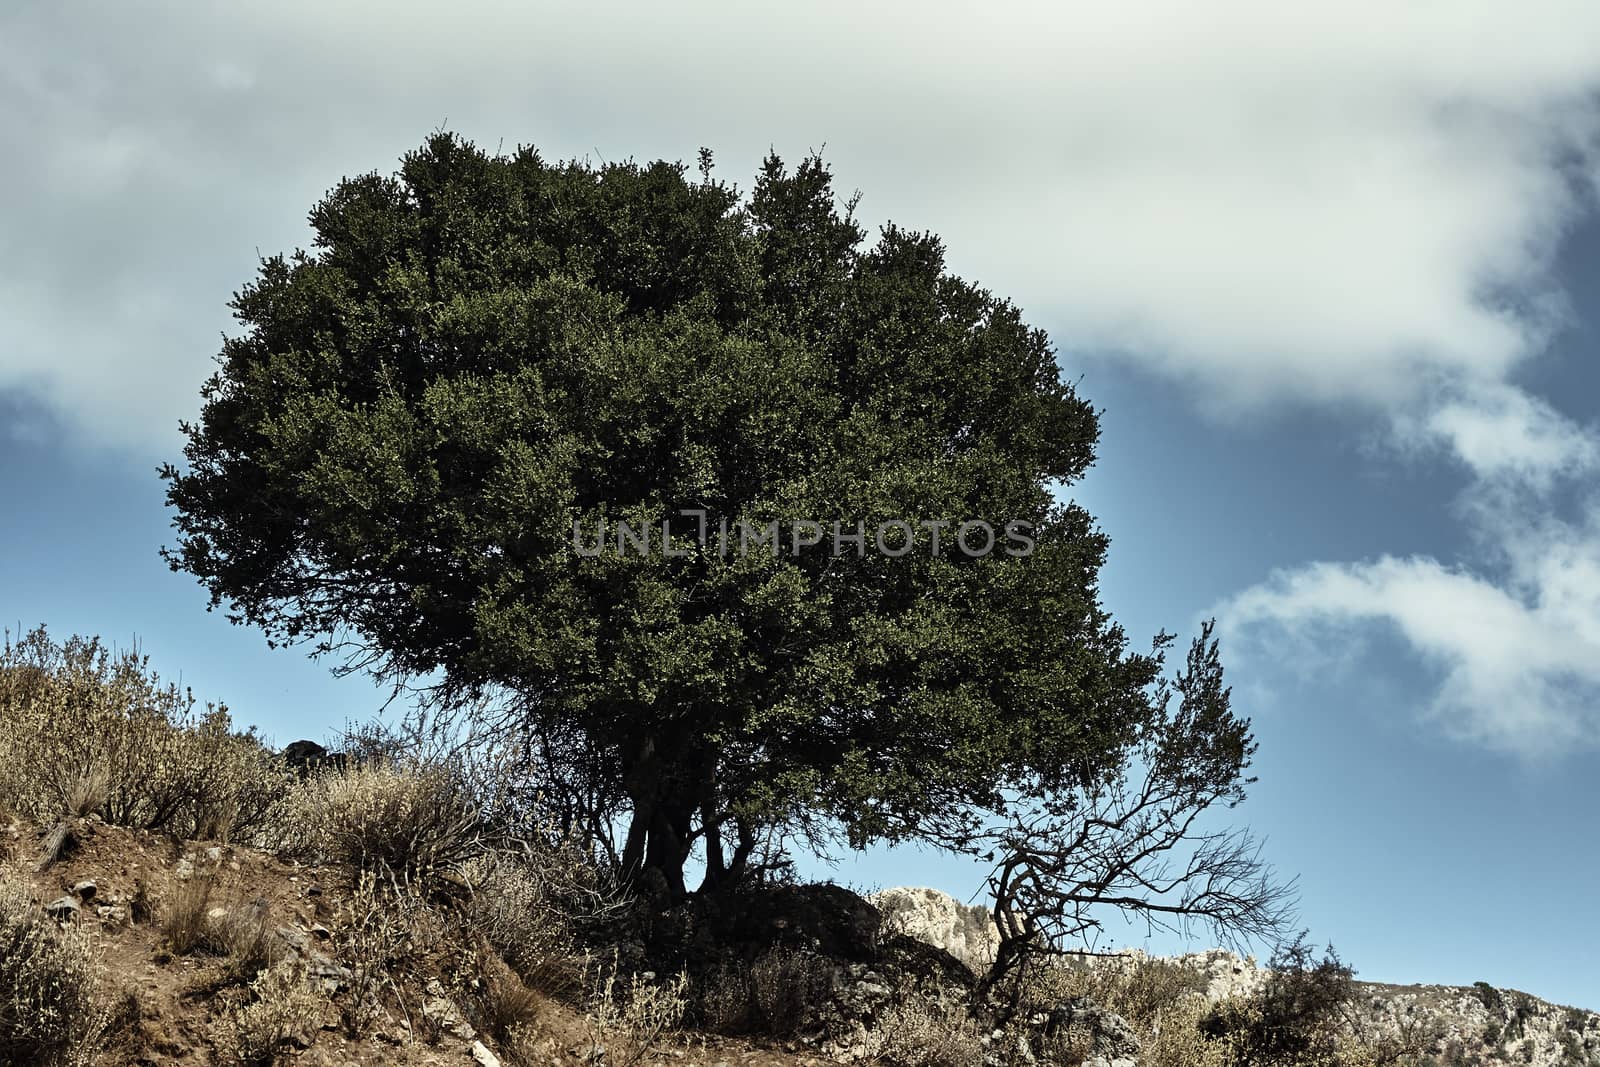 A tree growing on a rocky slope on the island of Crete, Greece